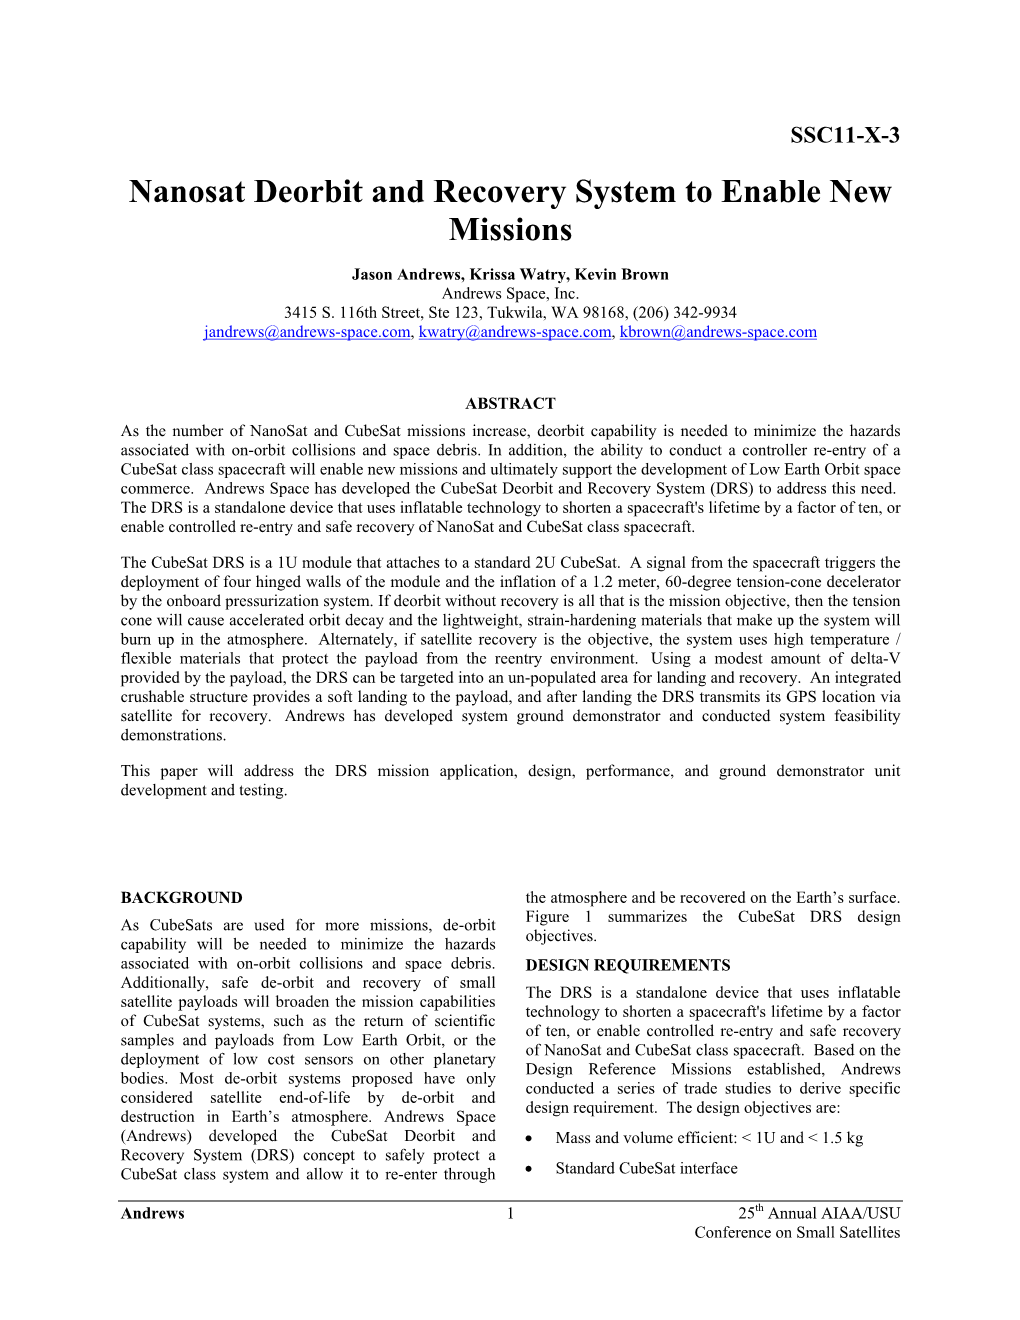 Nanosat Deorbit and Recovery System to Enable New Missions